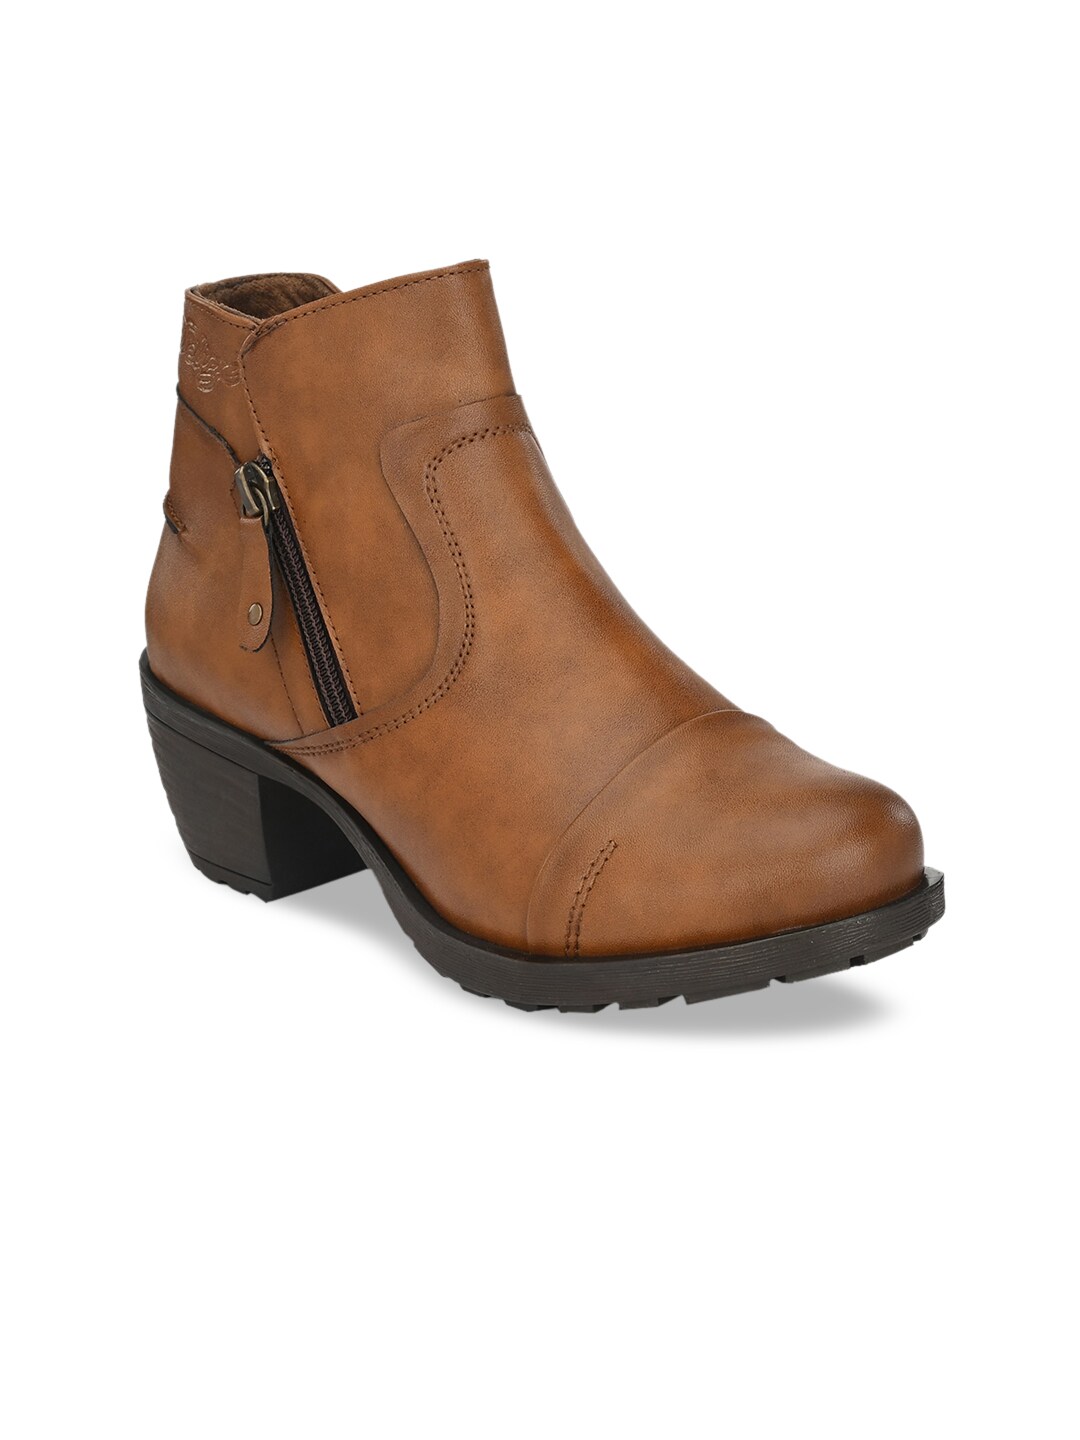 Delize Women Tan Brown Solid Heeled Boots Price in India